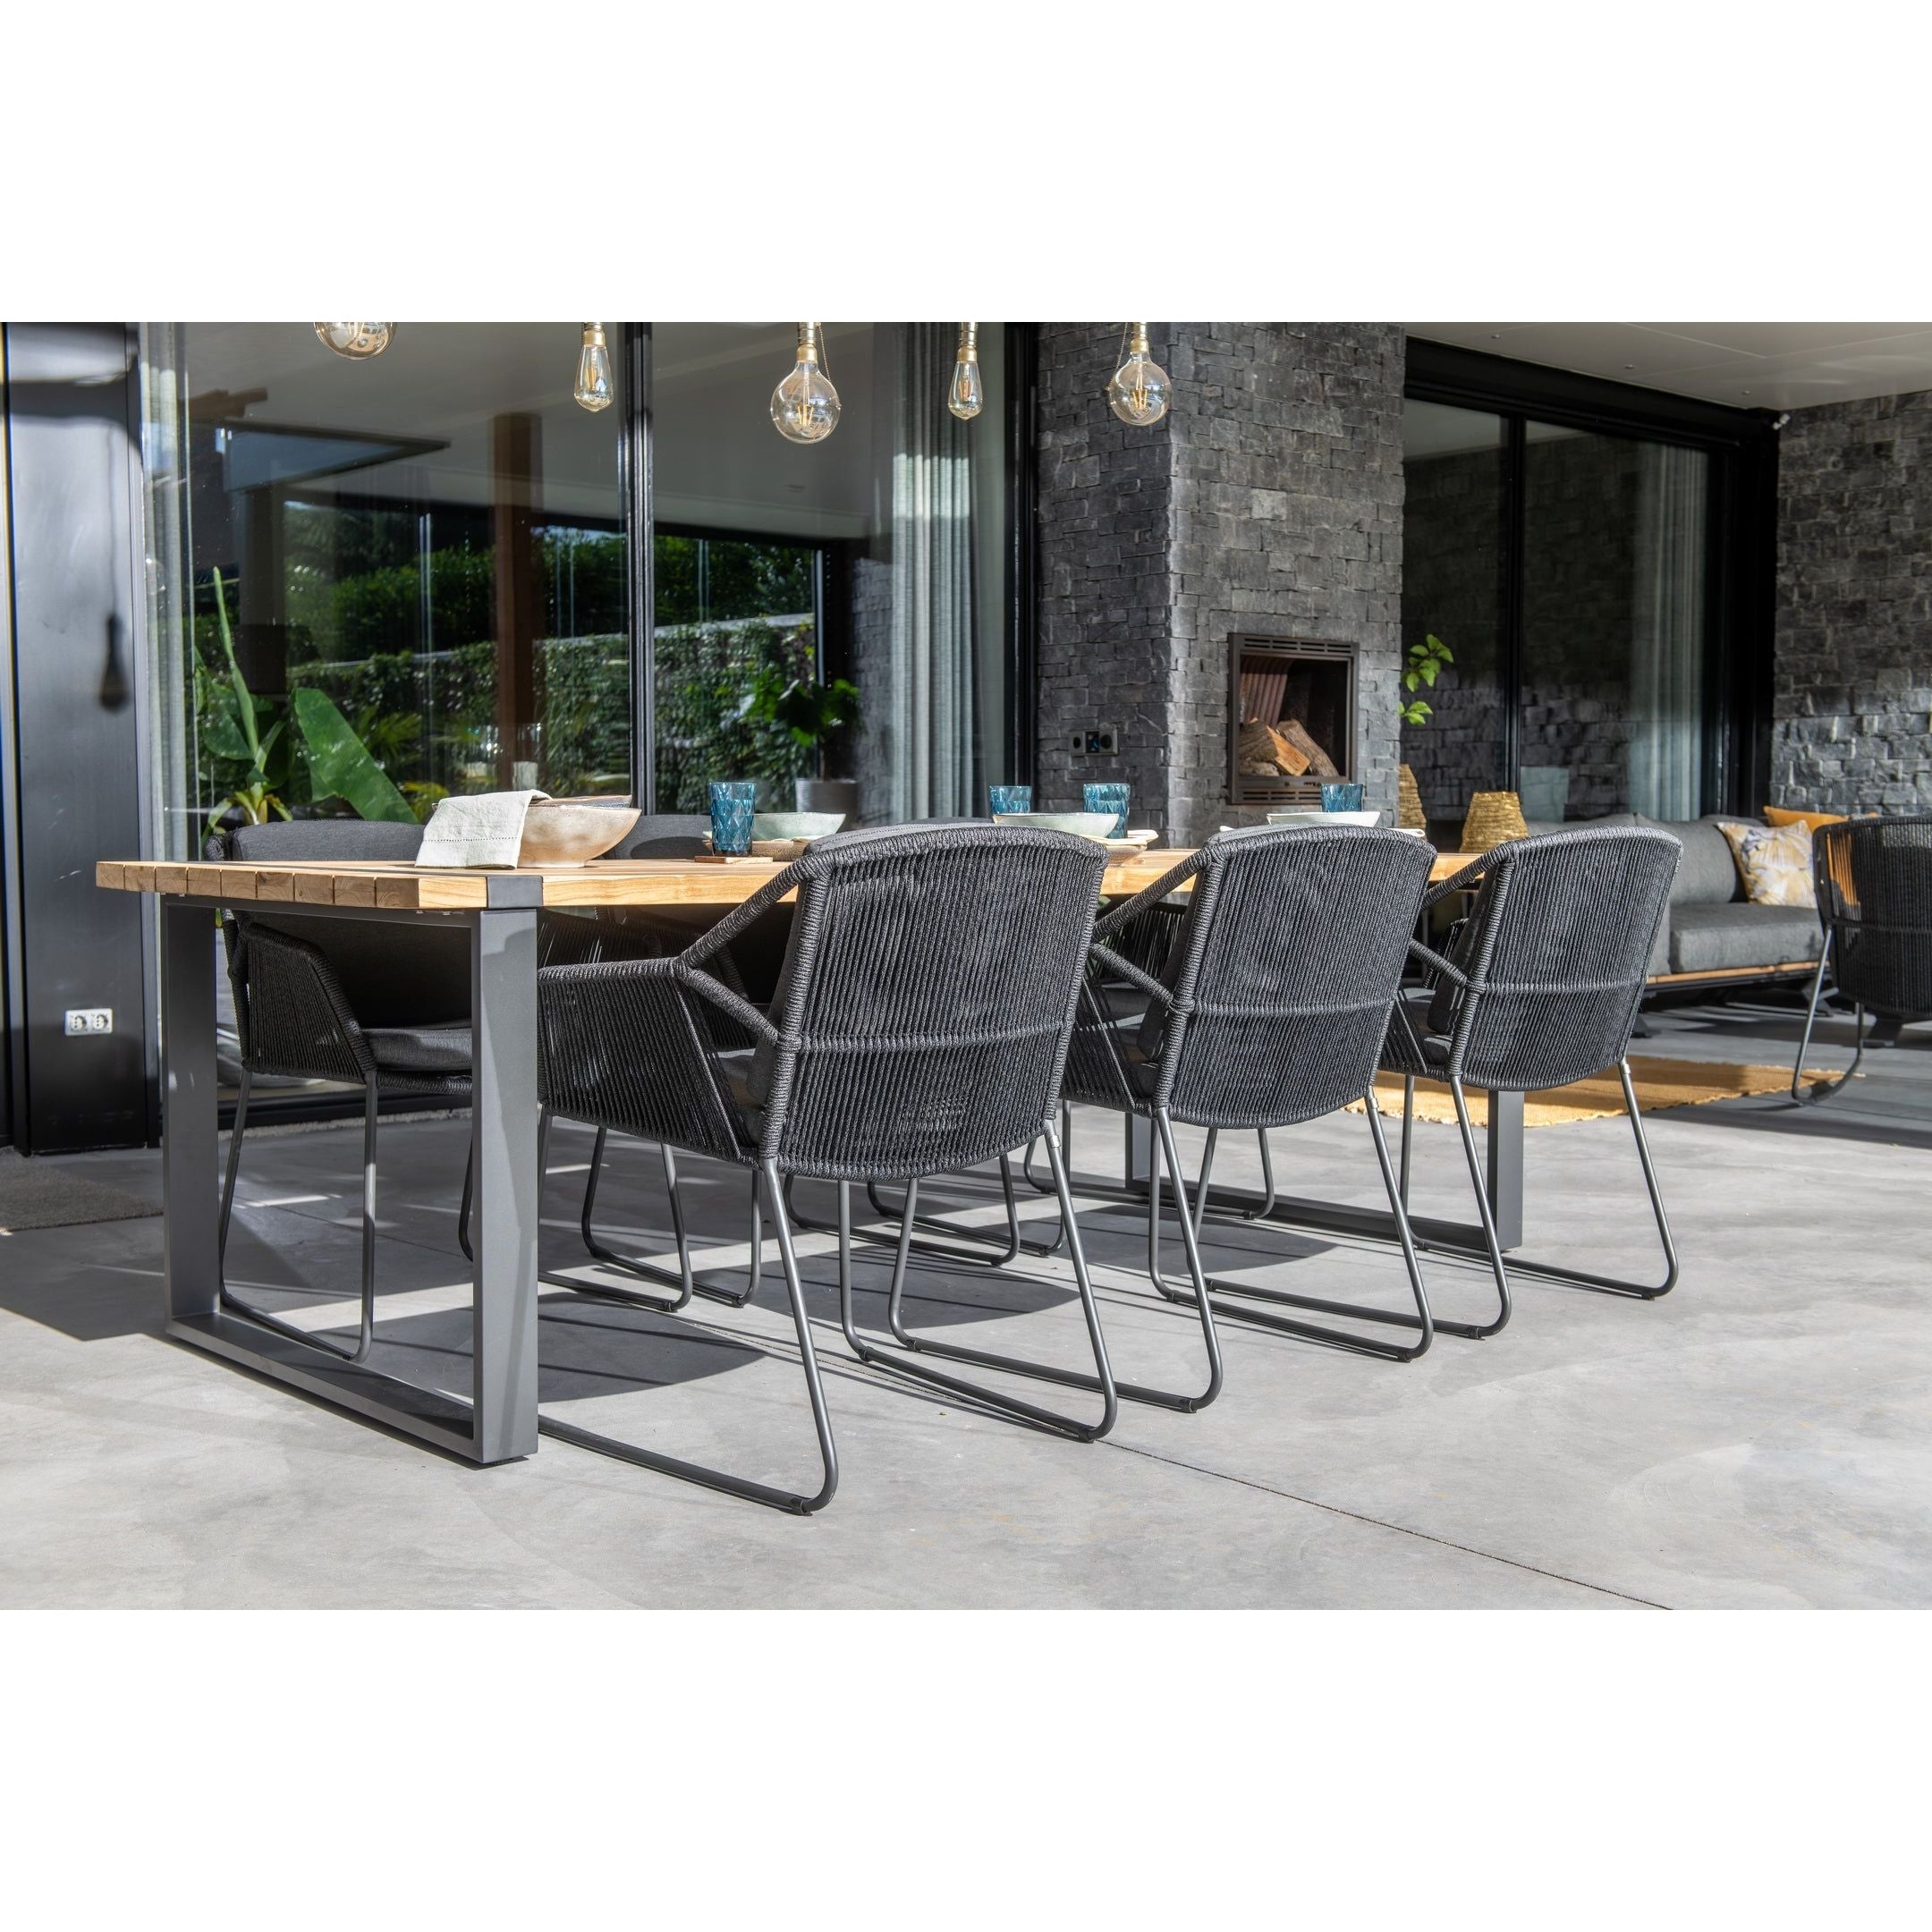 4 Seasons Outdoor Accor 6 Seater Dining Set with 240cm Alto Table